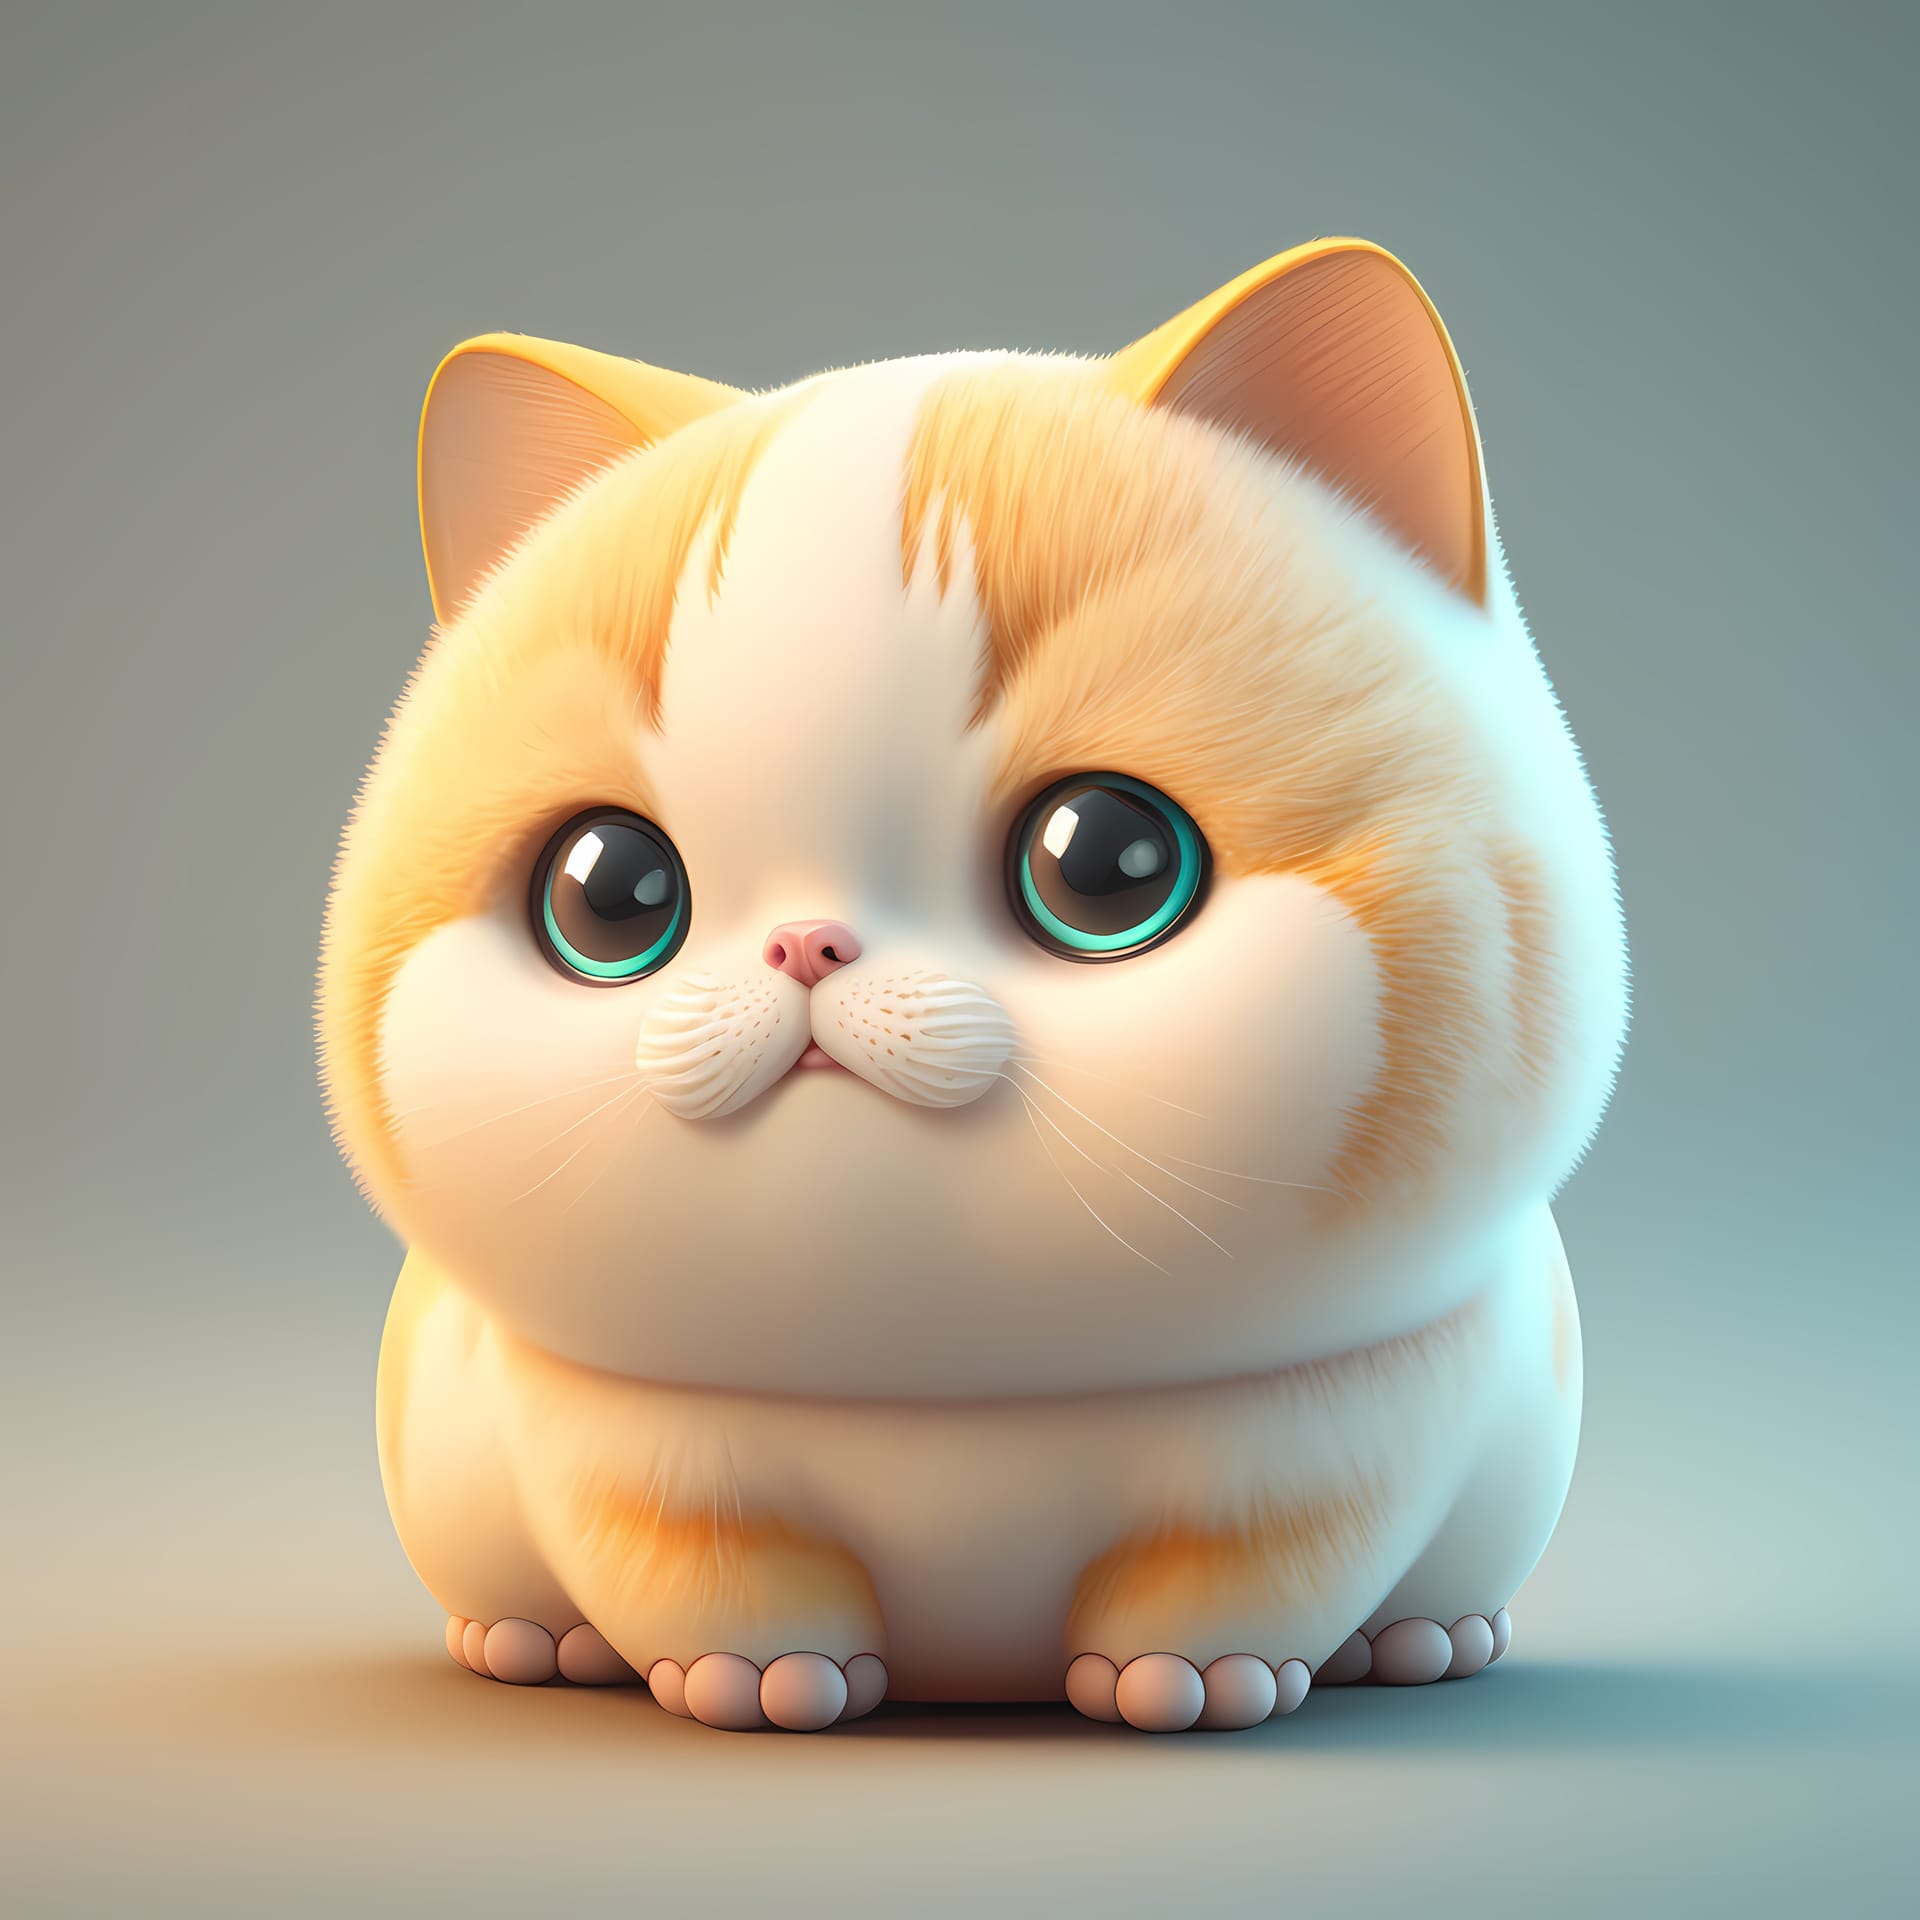 Adorable cute chubby cat 3d render fine picture